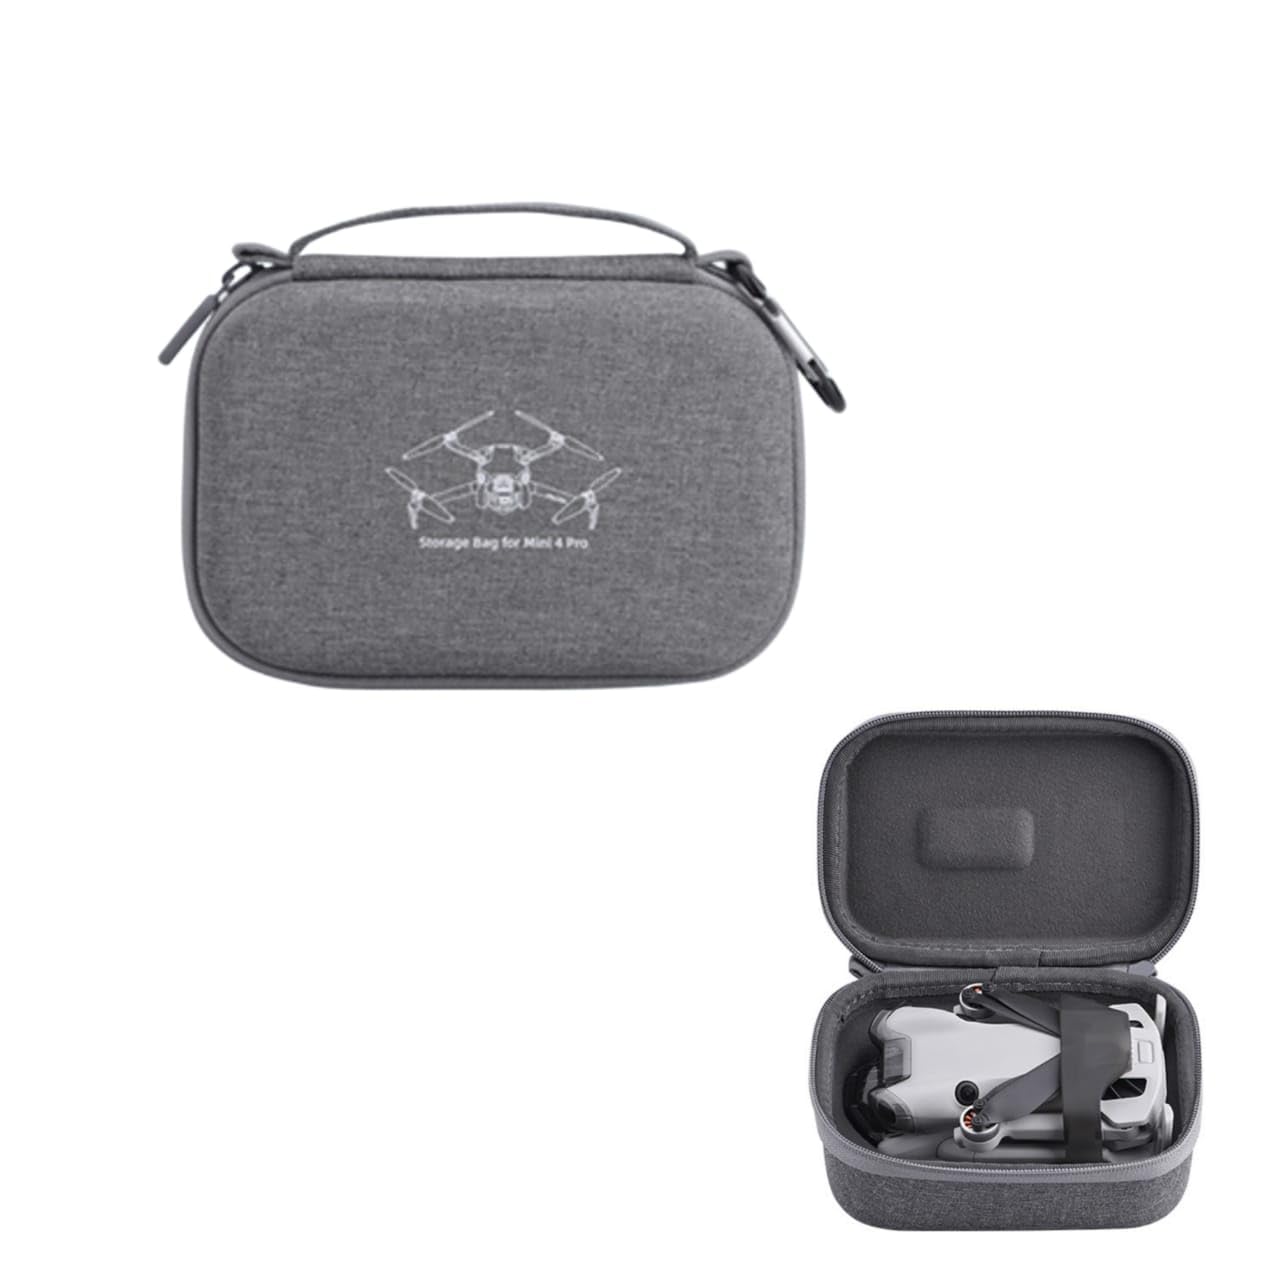 Carrying case Bag for DJI Mini 4 Pro Drone & Rc2 Remote Protective Compact Ca Best Air Travel Accessories (Combo Bags)